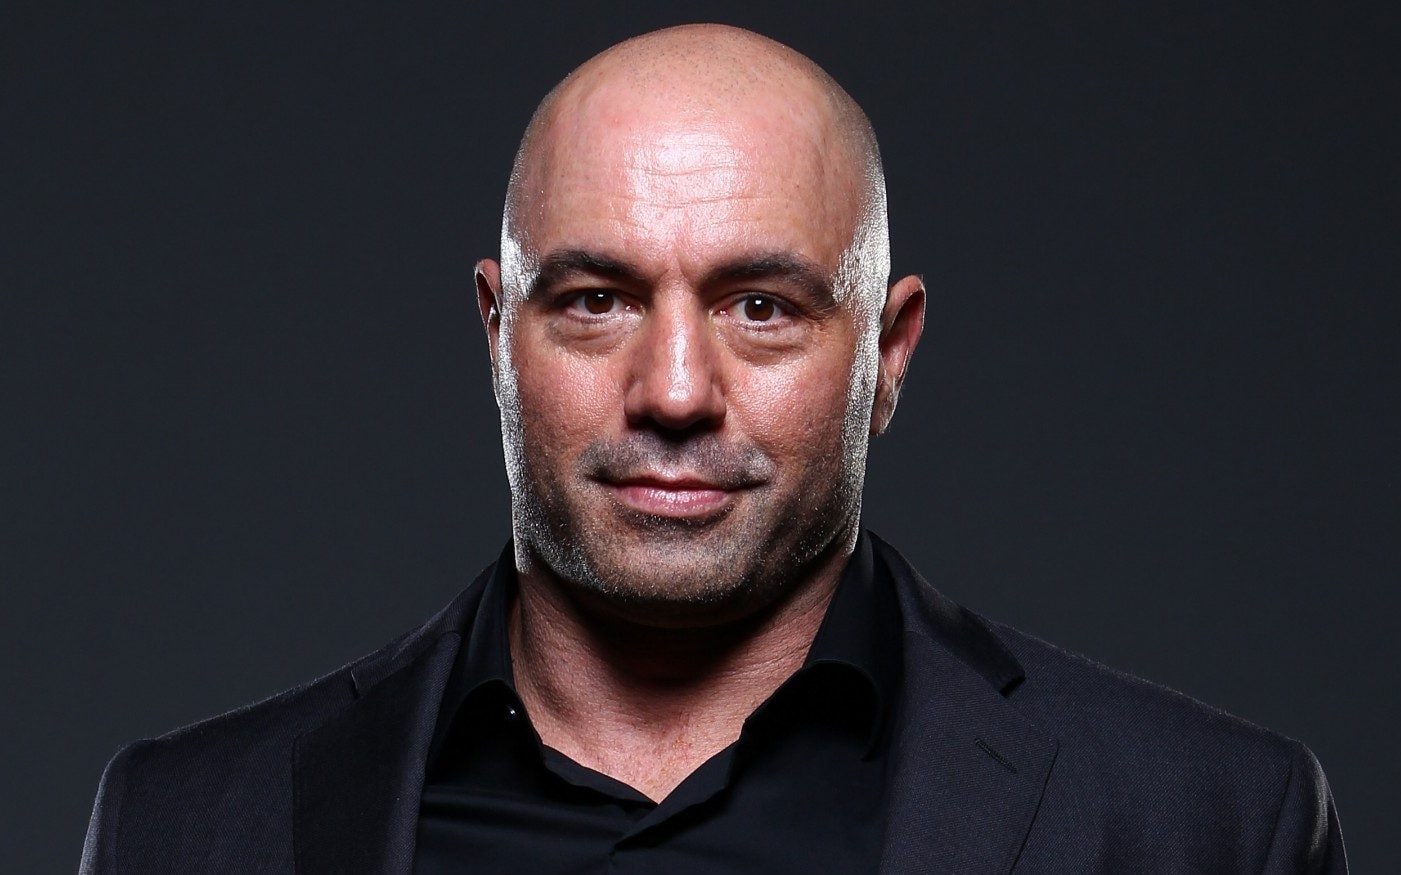 Joe Rogan Biography Height Weight Age Movies Wife Family Salary Net Worth Facts More